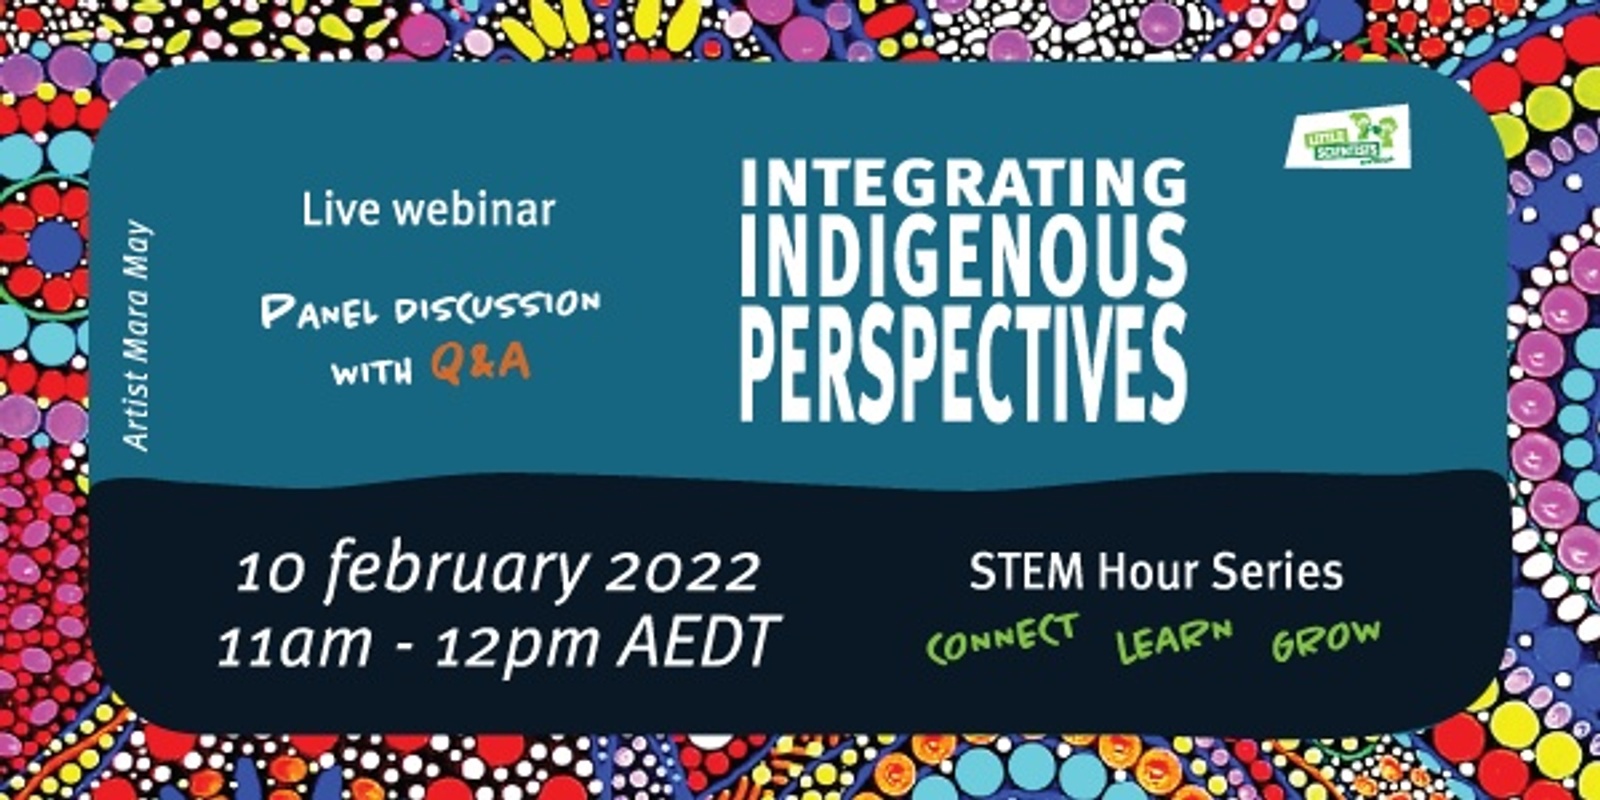 Banner image for STEM Hour: Connect, learn, grow - Integrating Indigenous perspectives